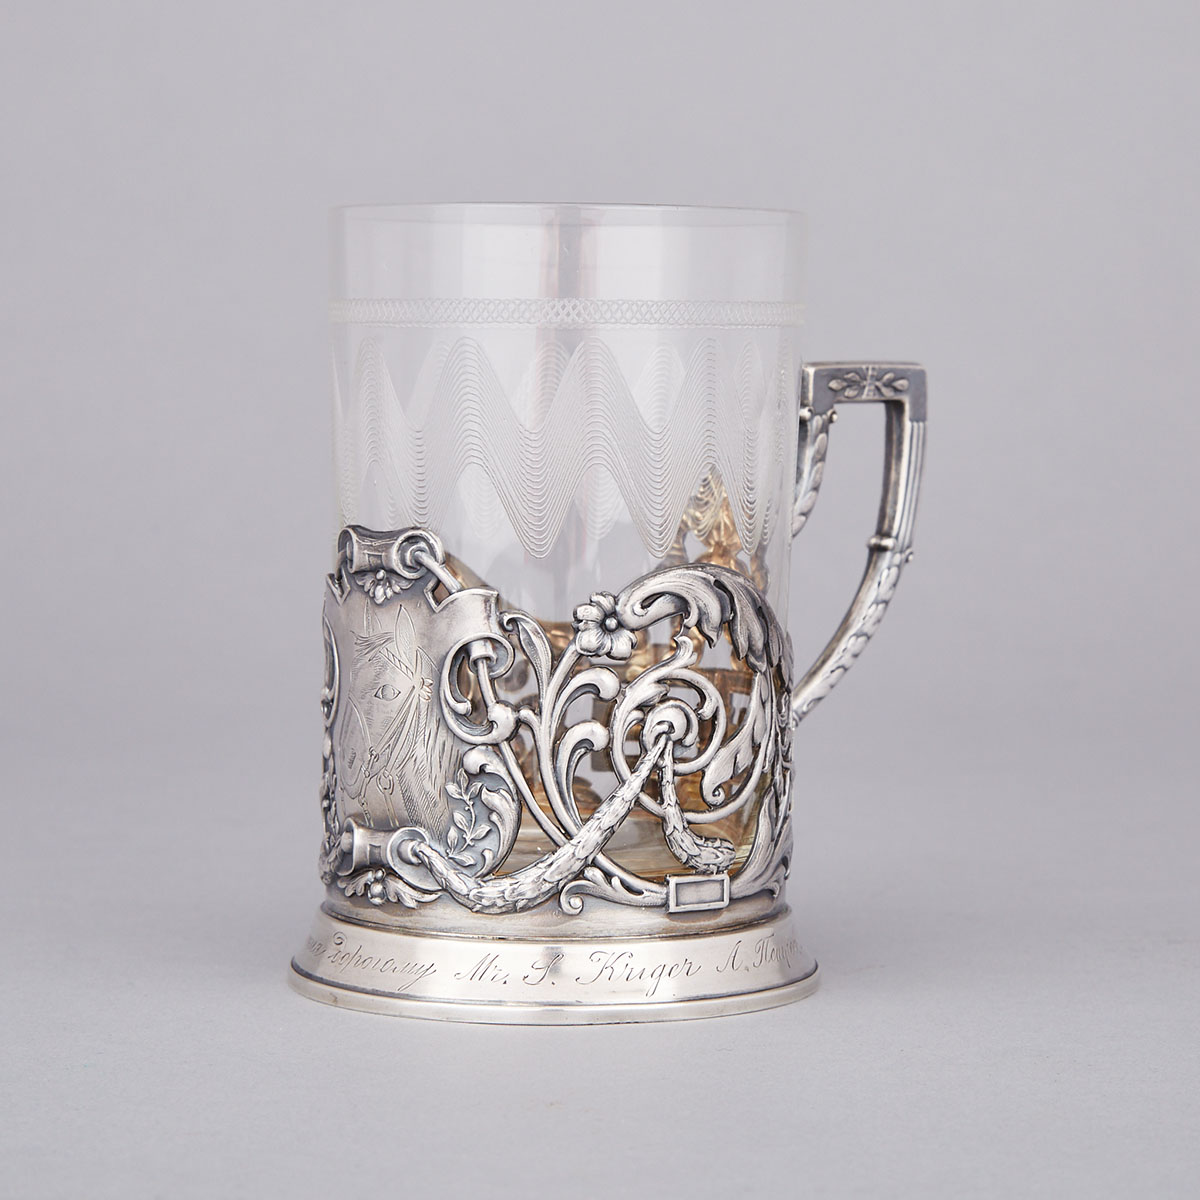 Russian Silver Tea Glass Frame, Moscow, c.1908-17